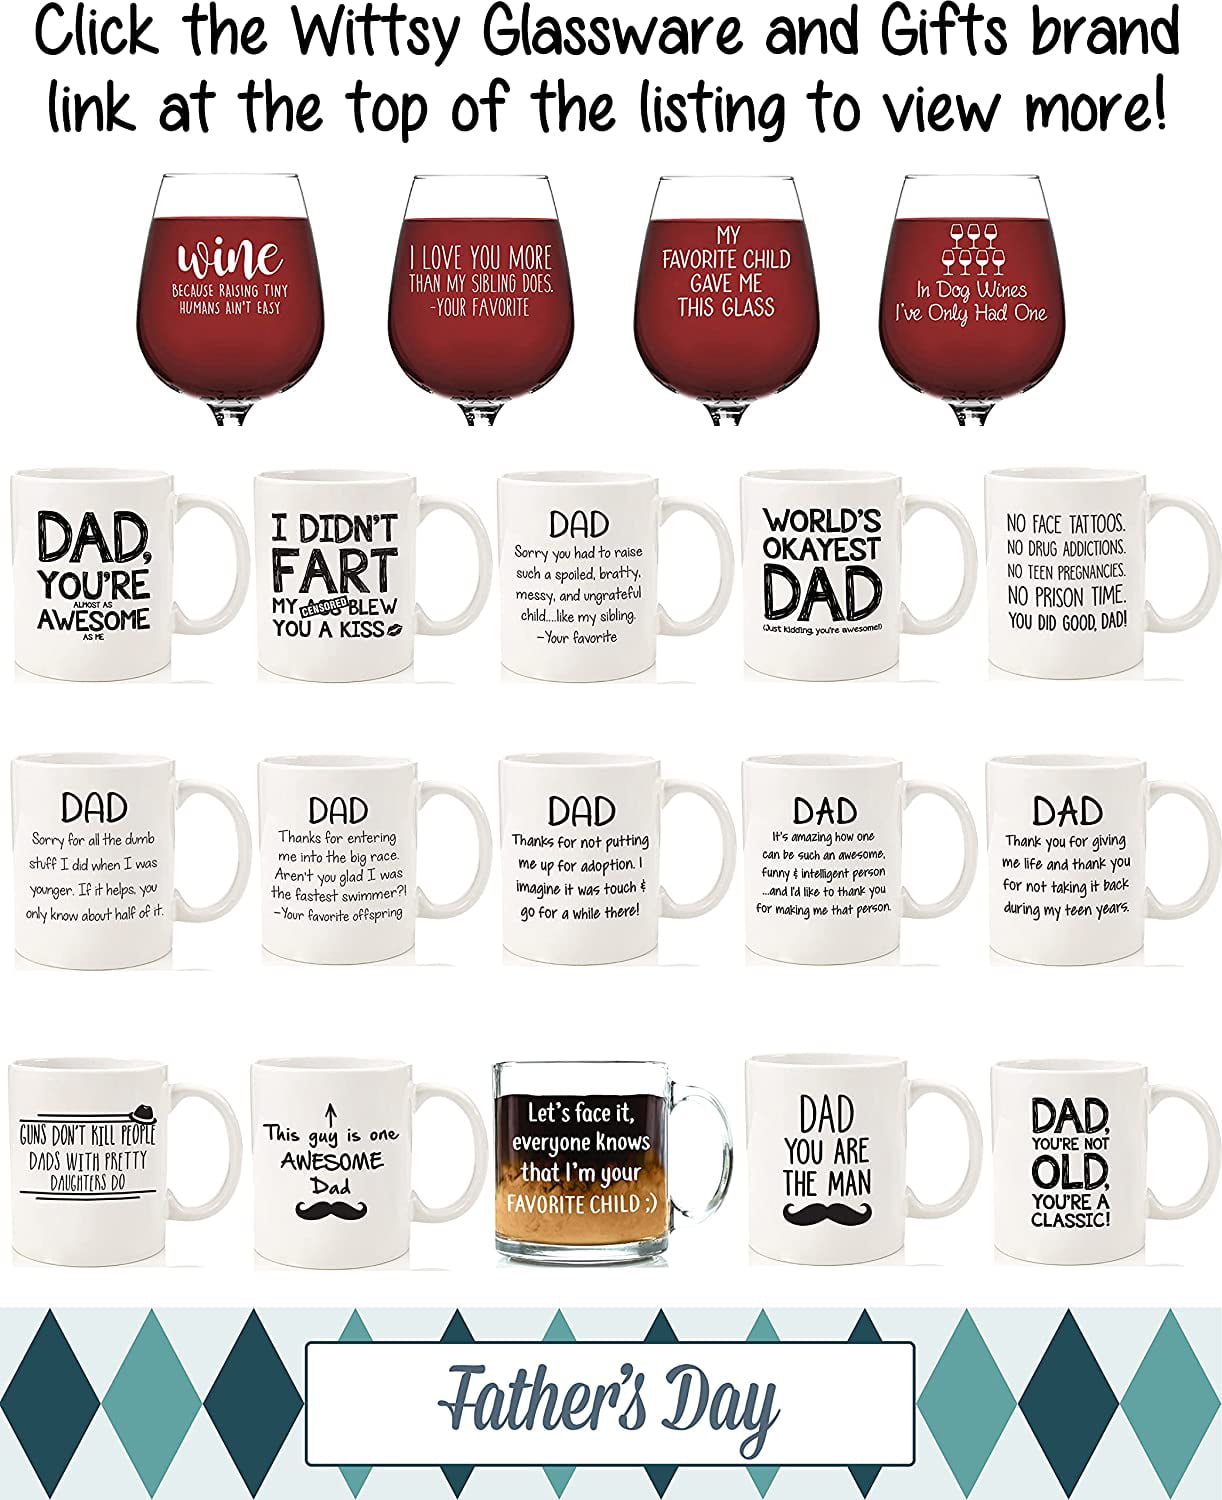 Dad Nutritional Information Yeti Mug - Funny Father's Day Gift – The  Farmer's Wife WI